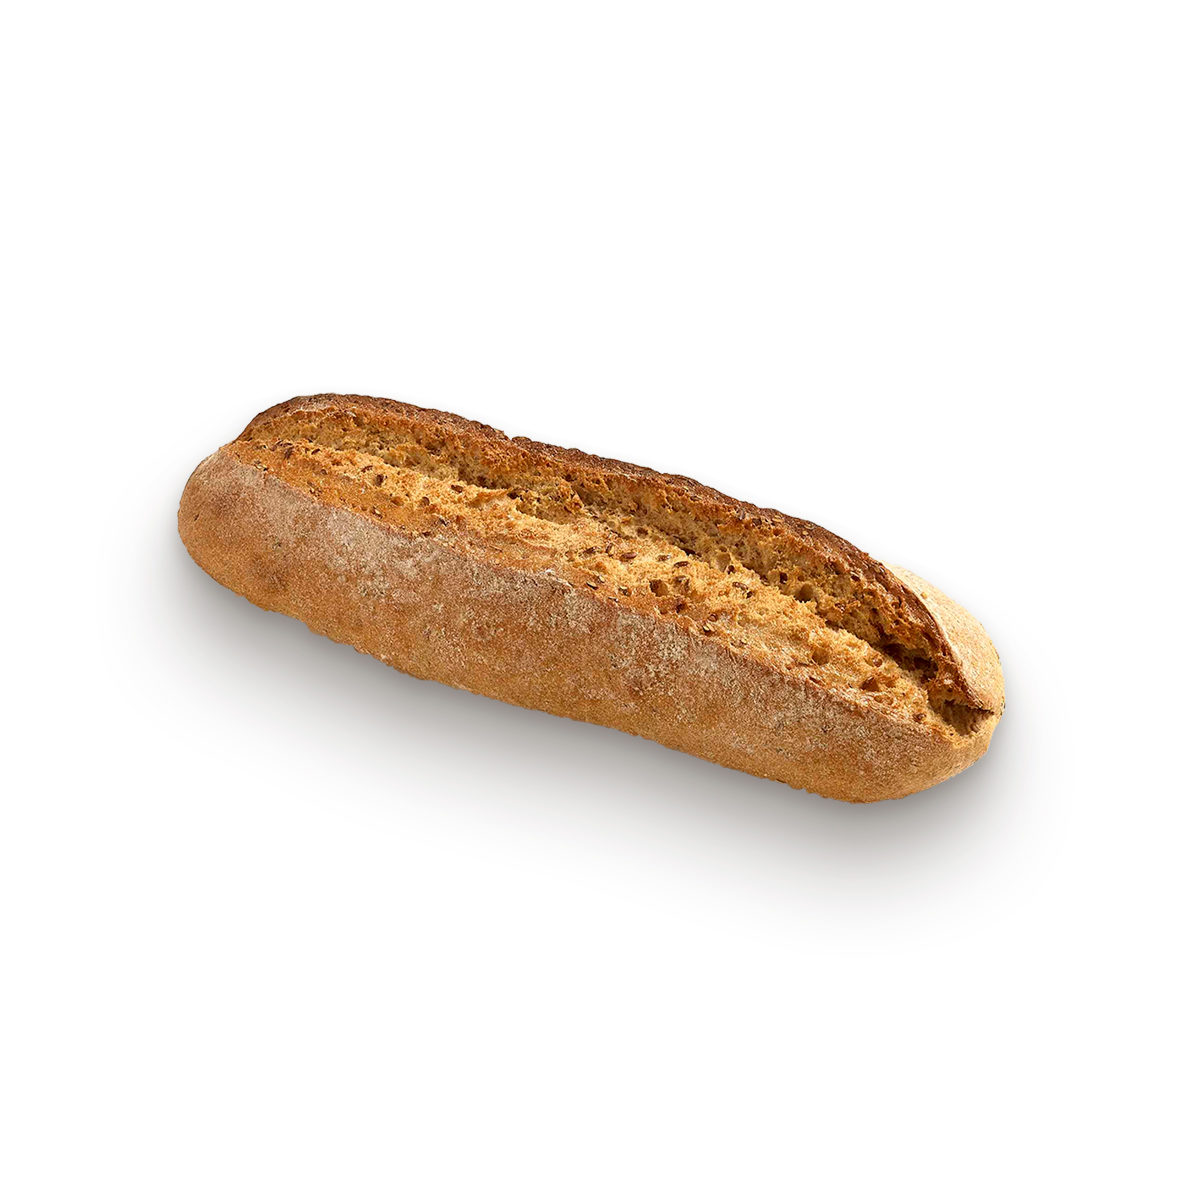 Wholemeal linseed baguette